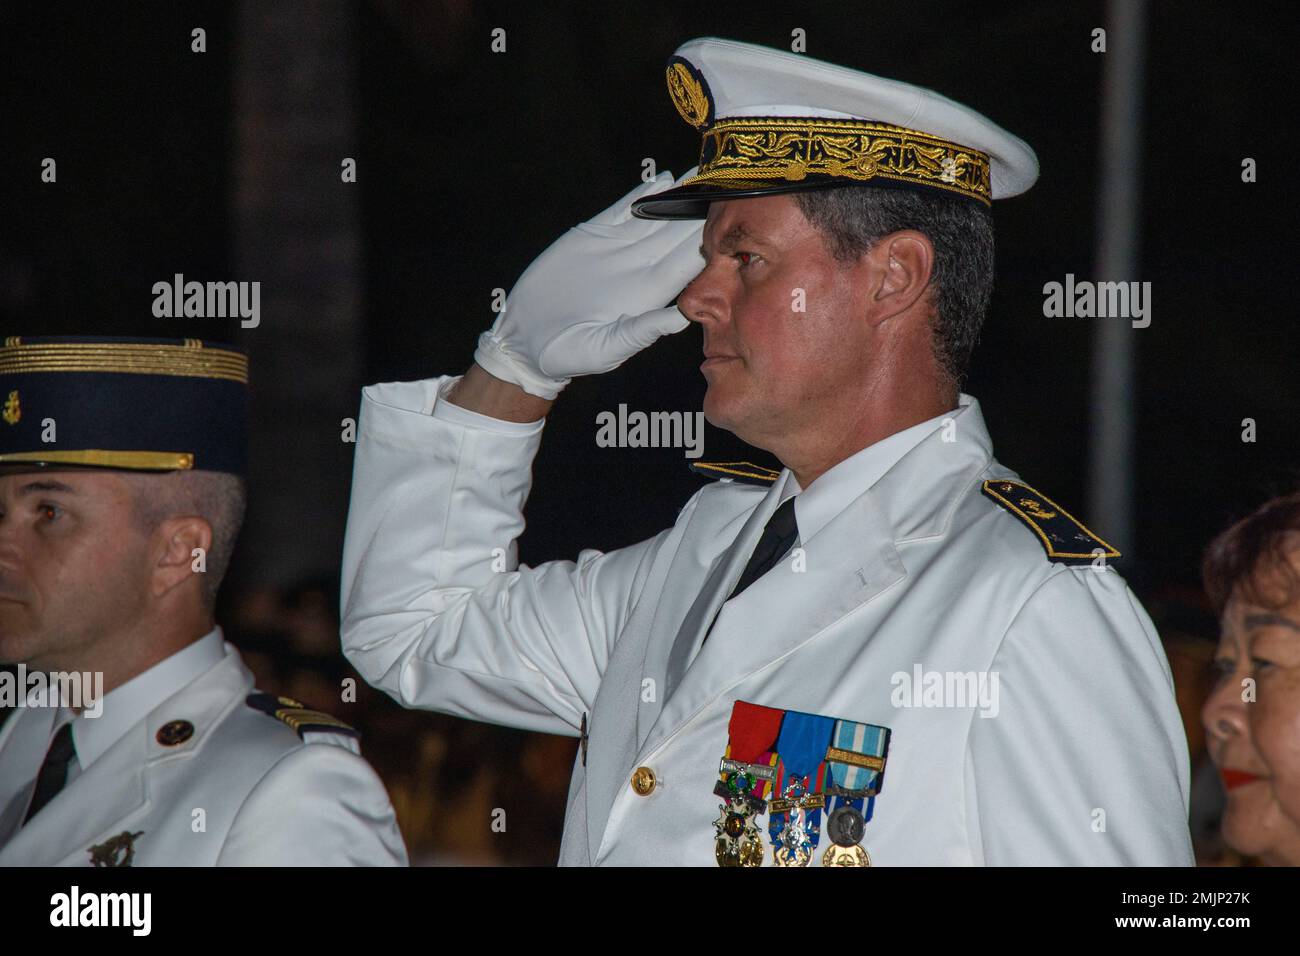 French Navy Rear Adm. Geoffroy d'Andigne, joint commander of the French Armed Forces in the Asia-Pacific, renders a salute during the playing of the French National Anthem during the Bazeilles Day Ceremony in Pirae, Tahiti, French Polynesia, Aug. 31, 2022. The ceremony honored the events of the Franco-Prussian War in 1870, when French Marines stood up to a force of Bavarians who outnumbered the French 10 to one. Taking place in the French Village of Bazeilles, the battle is considered one of the first occurrences of urban warfare. Stock Photo